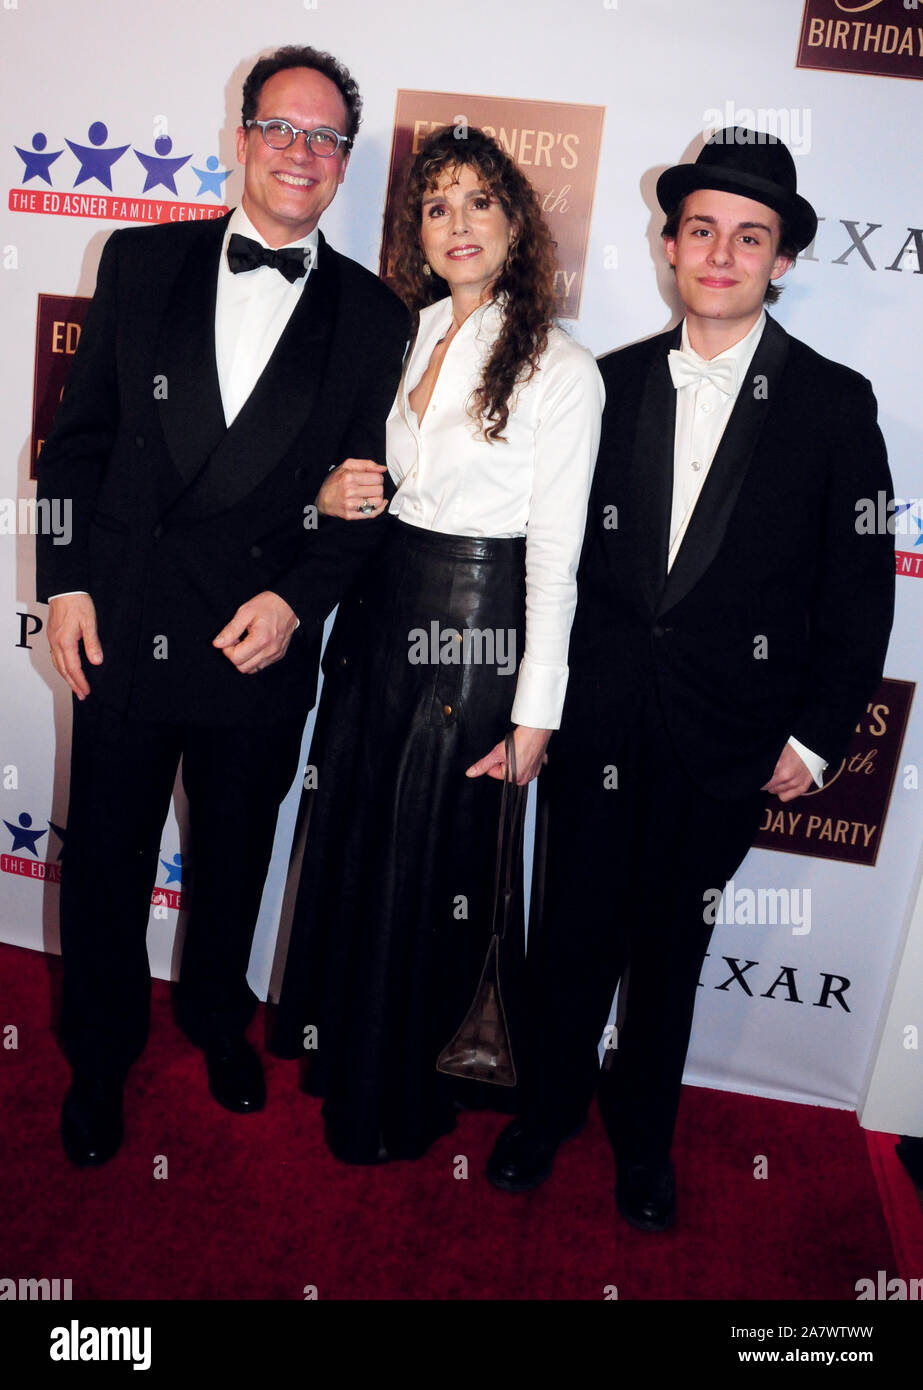 Hollywood, California, USA 3rd November 2019 Actor Diedrich Bader, wife Dulcy Rogers and son Sebastian Bader attend Ed Asner's 90th Birthday Party and Roast on November 3, 2019 at Hollywood Roosevelt Hotel in Hollywood, California, USA. Photo by Barry King/Alamy Stock Photo Stock Photo